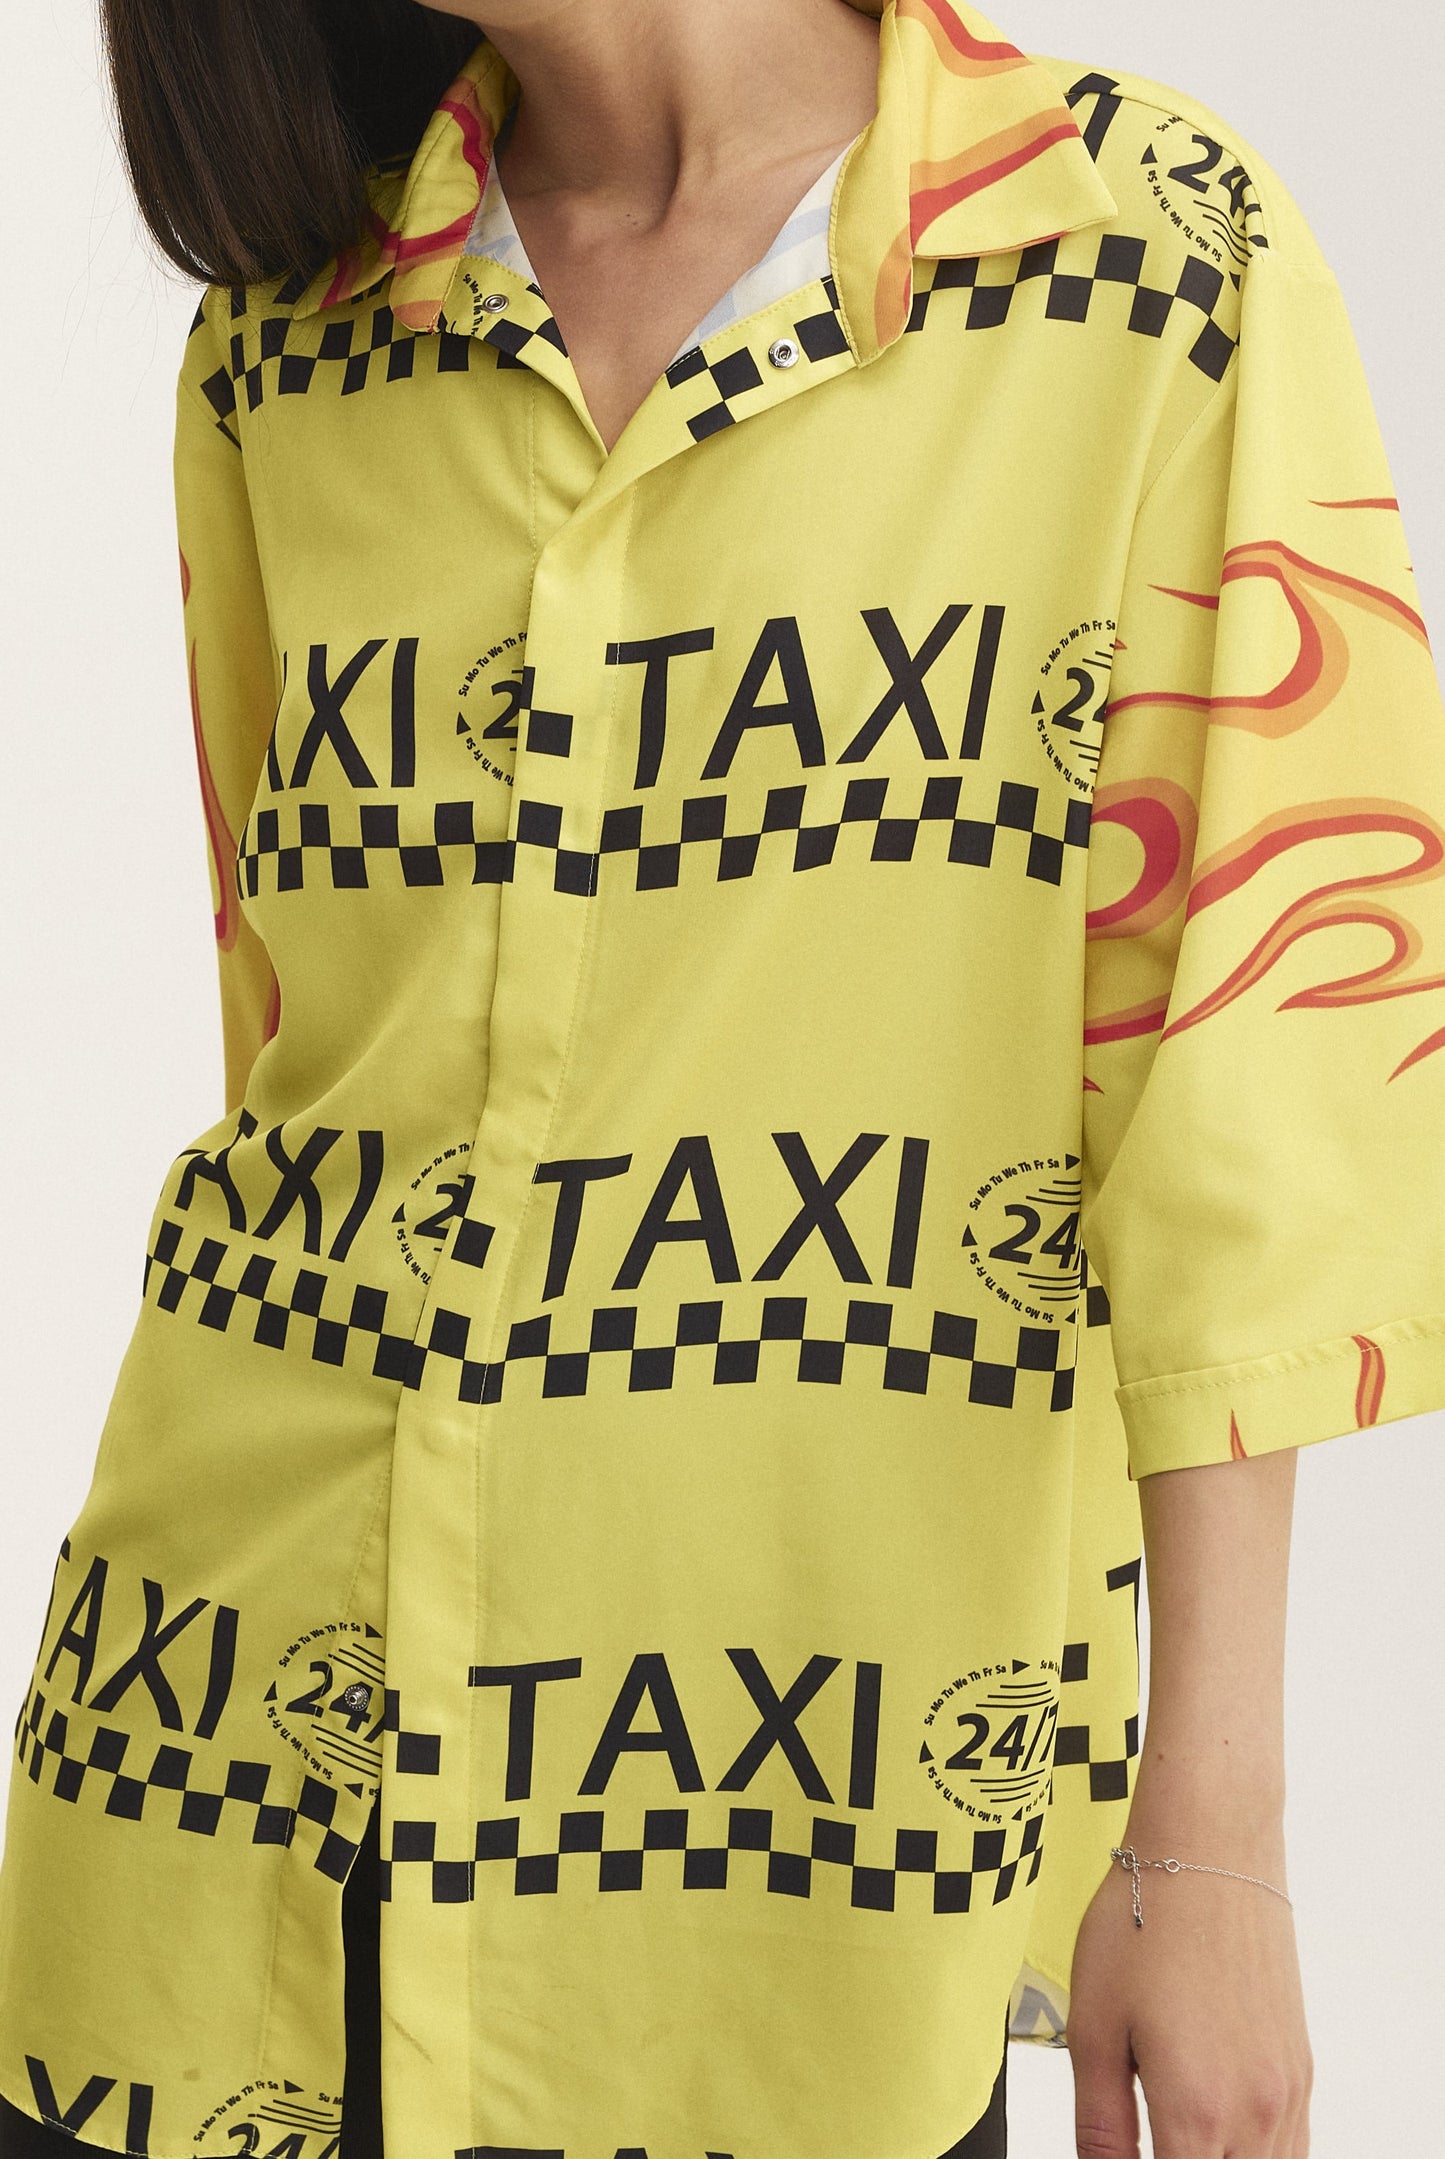 Short Sleeve Shirt Taxi (recycled fabric)